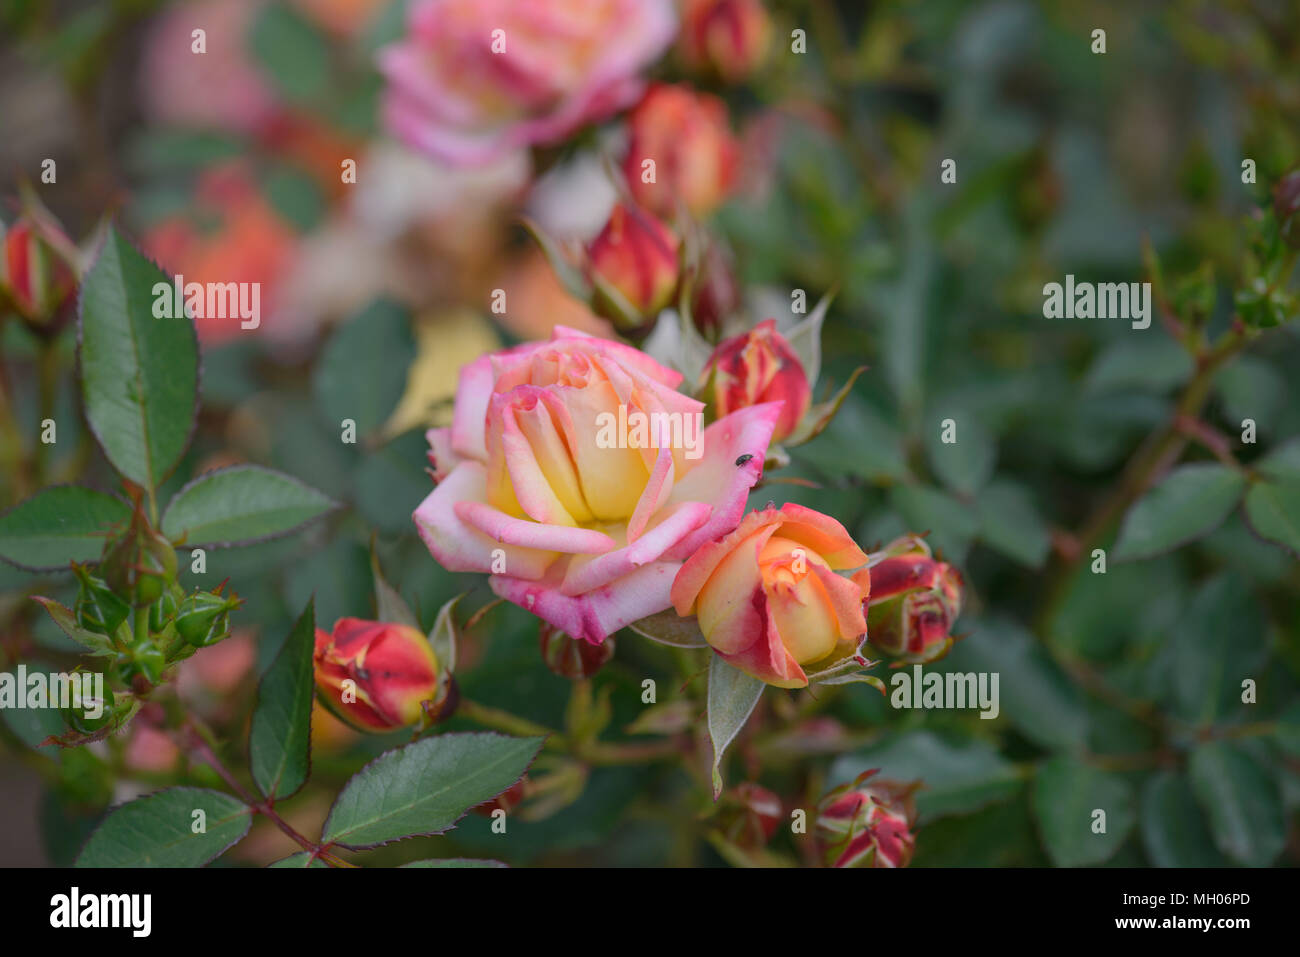 Rose Little Sunset High Resolution Stock Photography and Images - Alamy